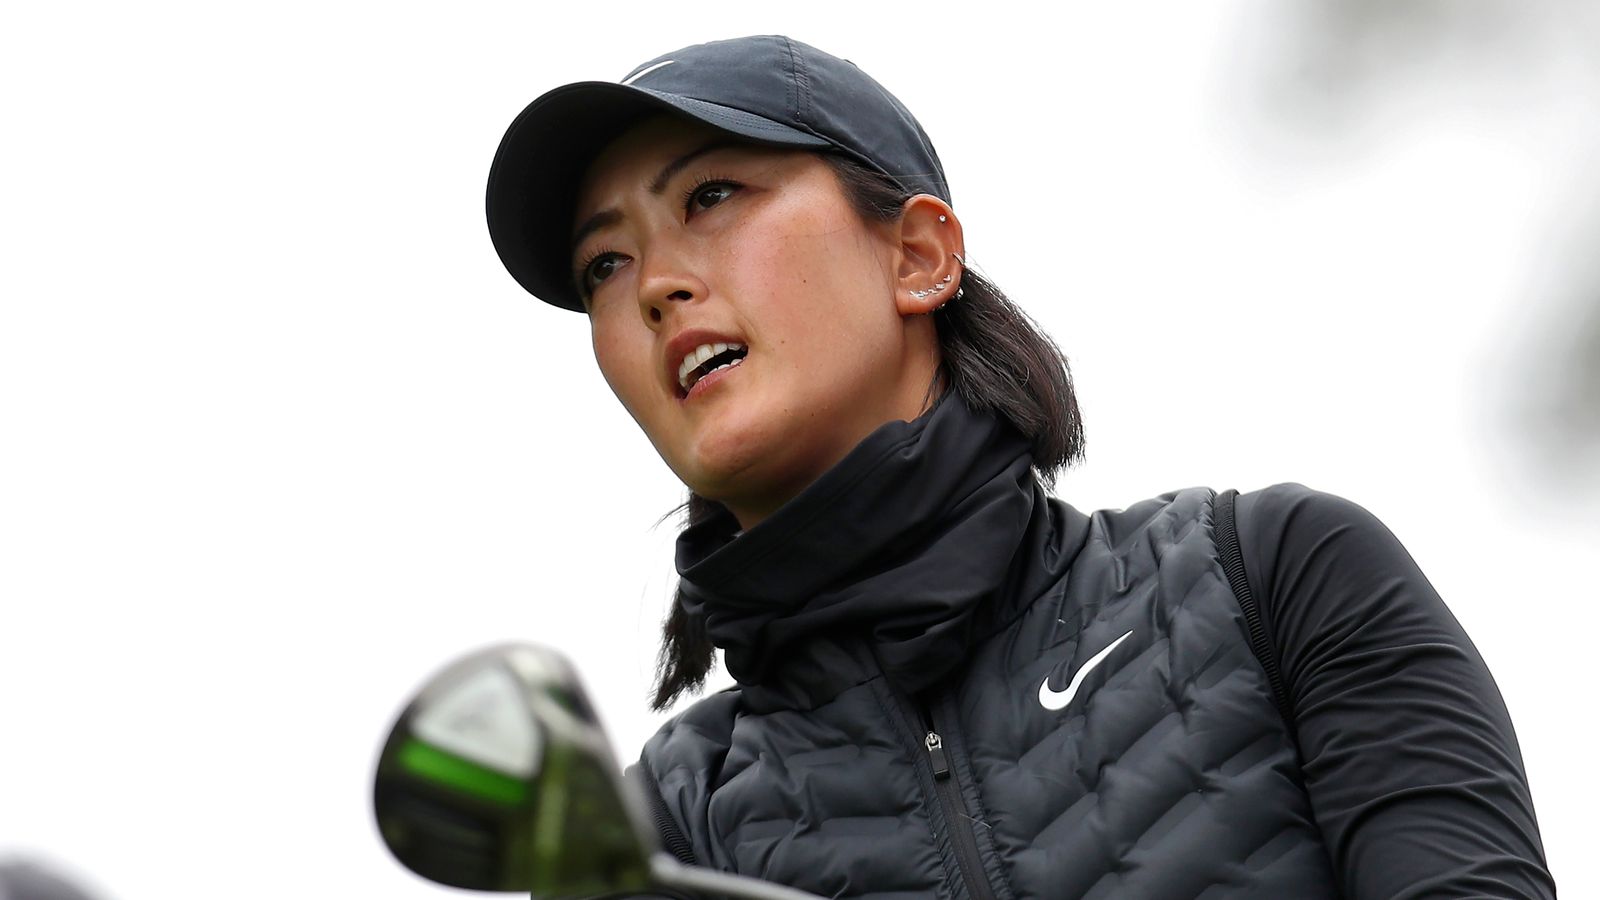 Michelle Wie West to step away from LPGA Tour at age of 32, will play US Open next week and 2023